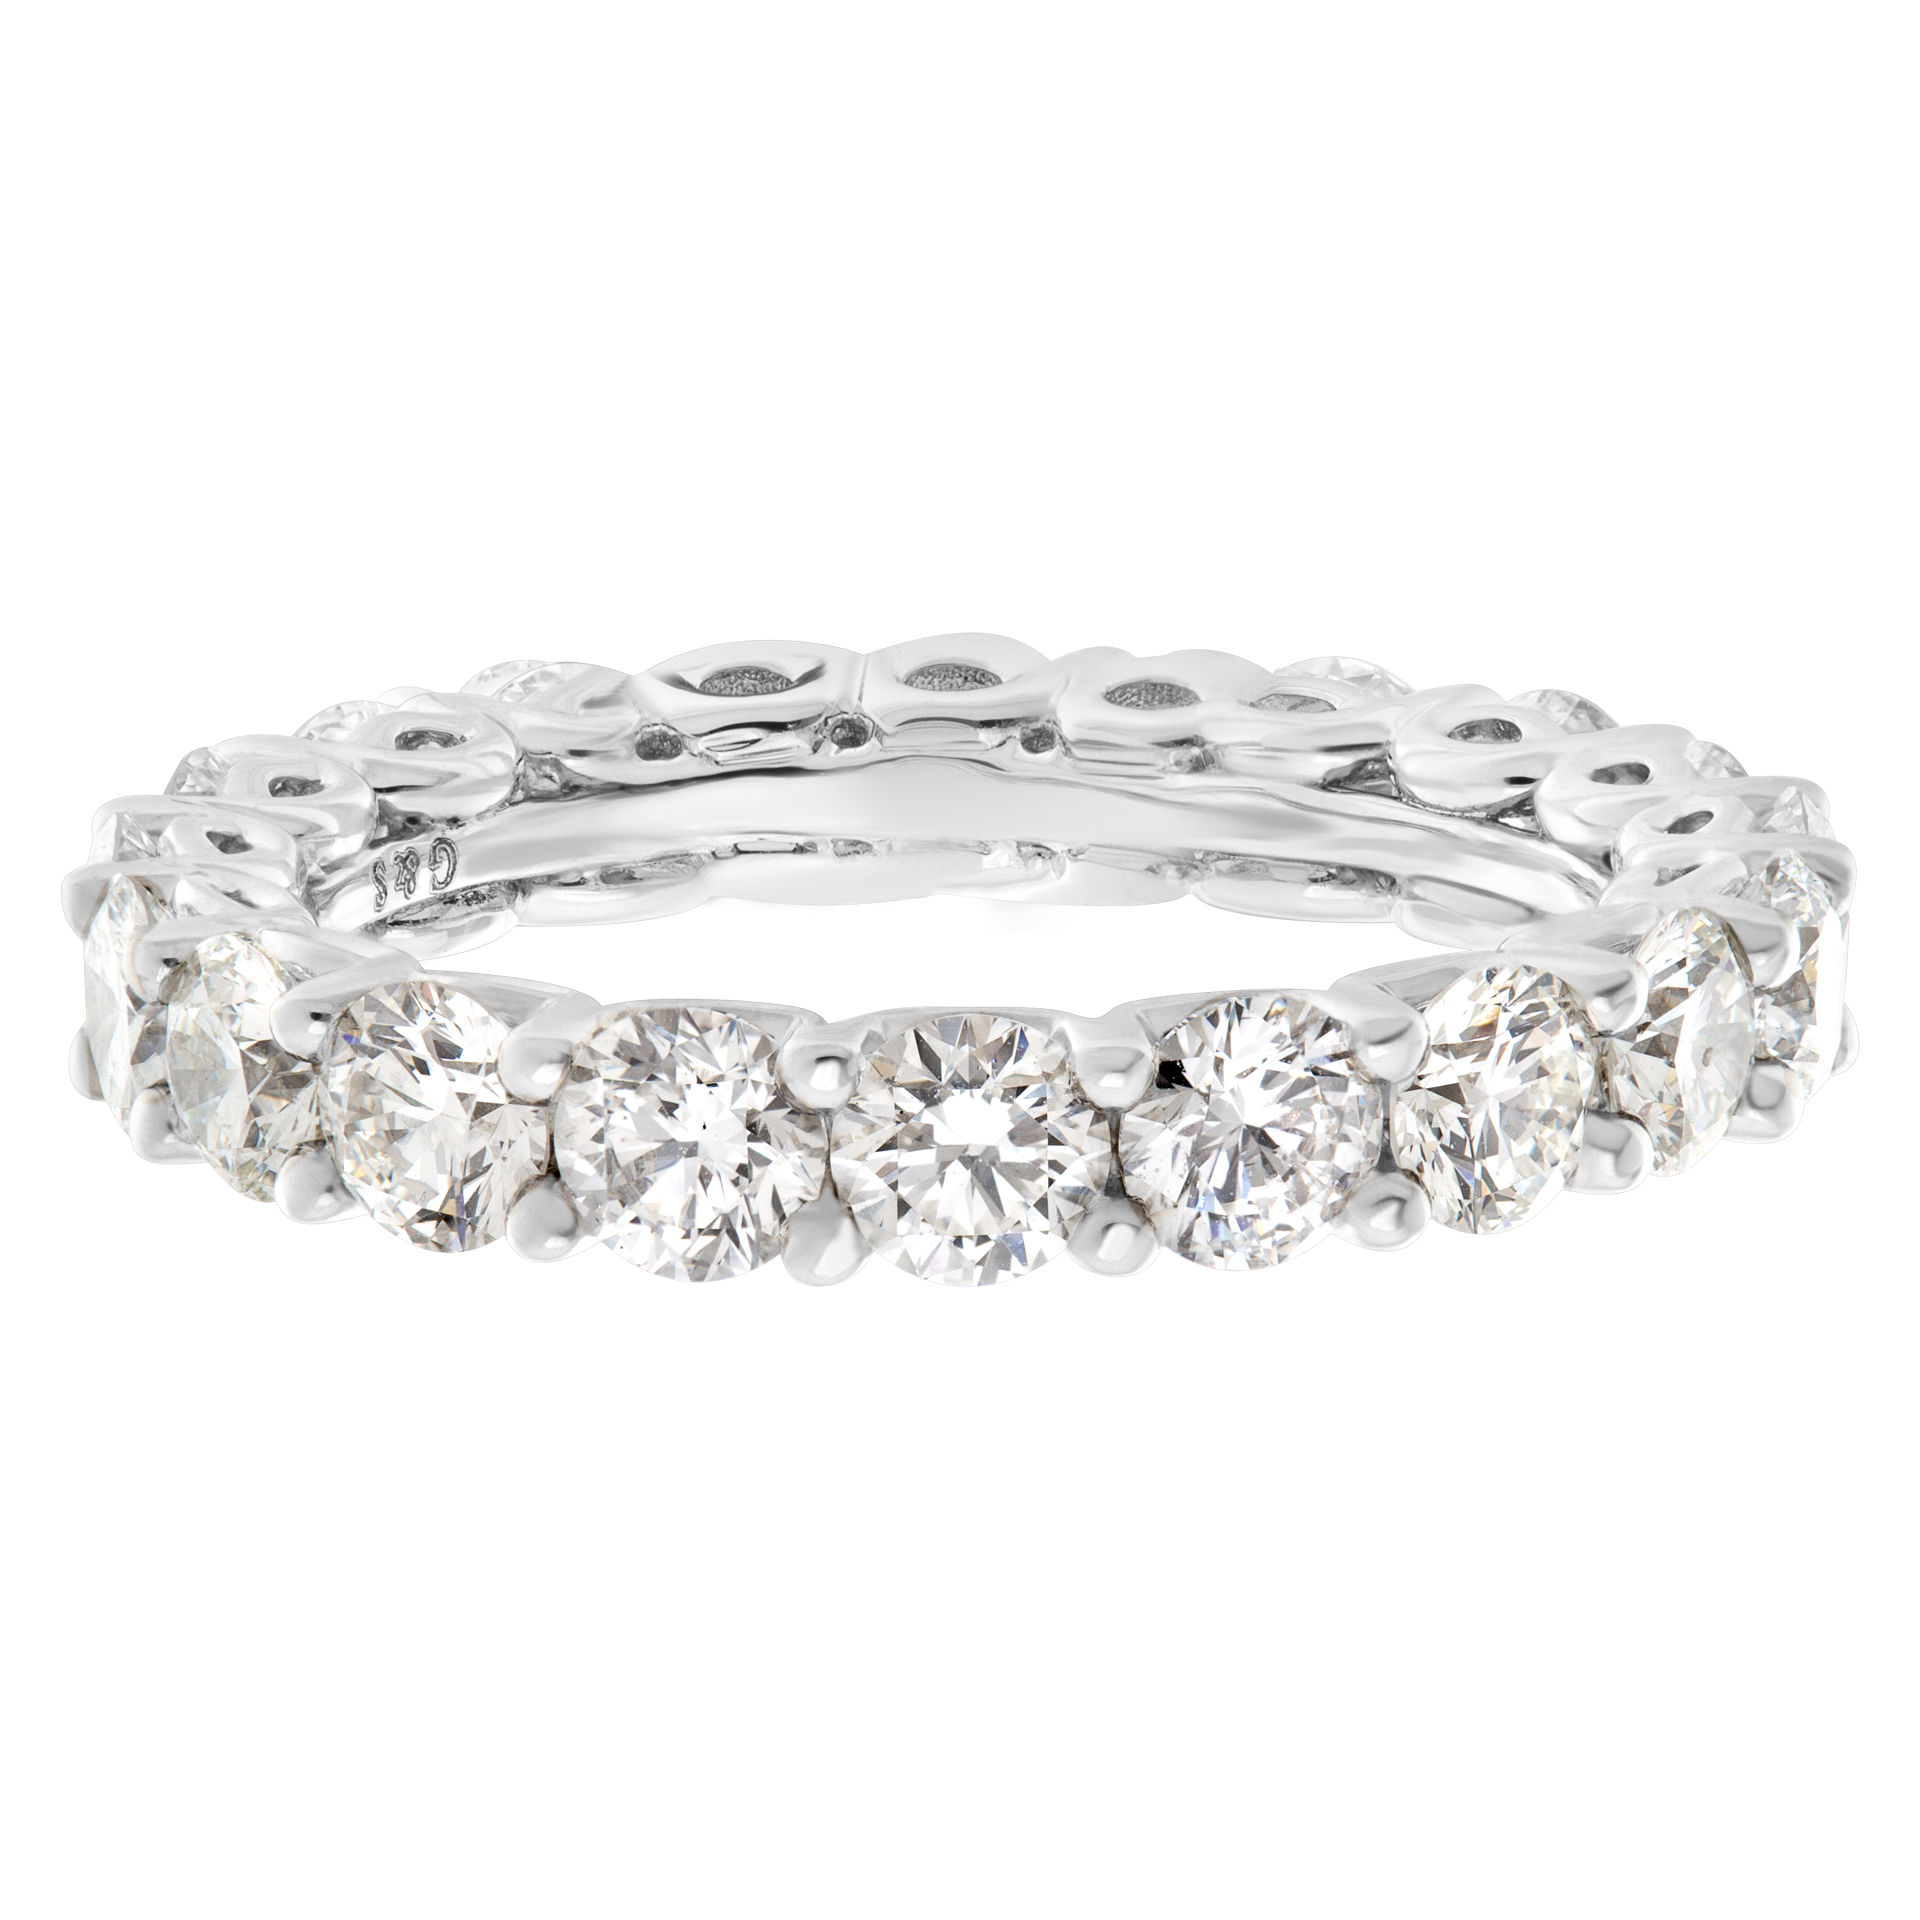 Diamond Eternity Band and Ring with approximately 3 carats in diamonds set in platinum